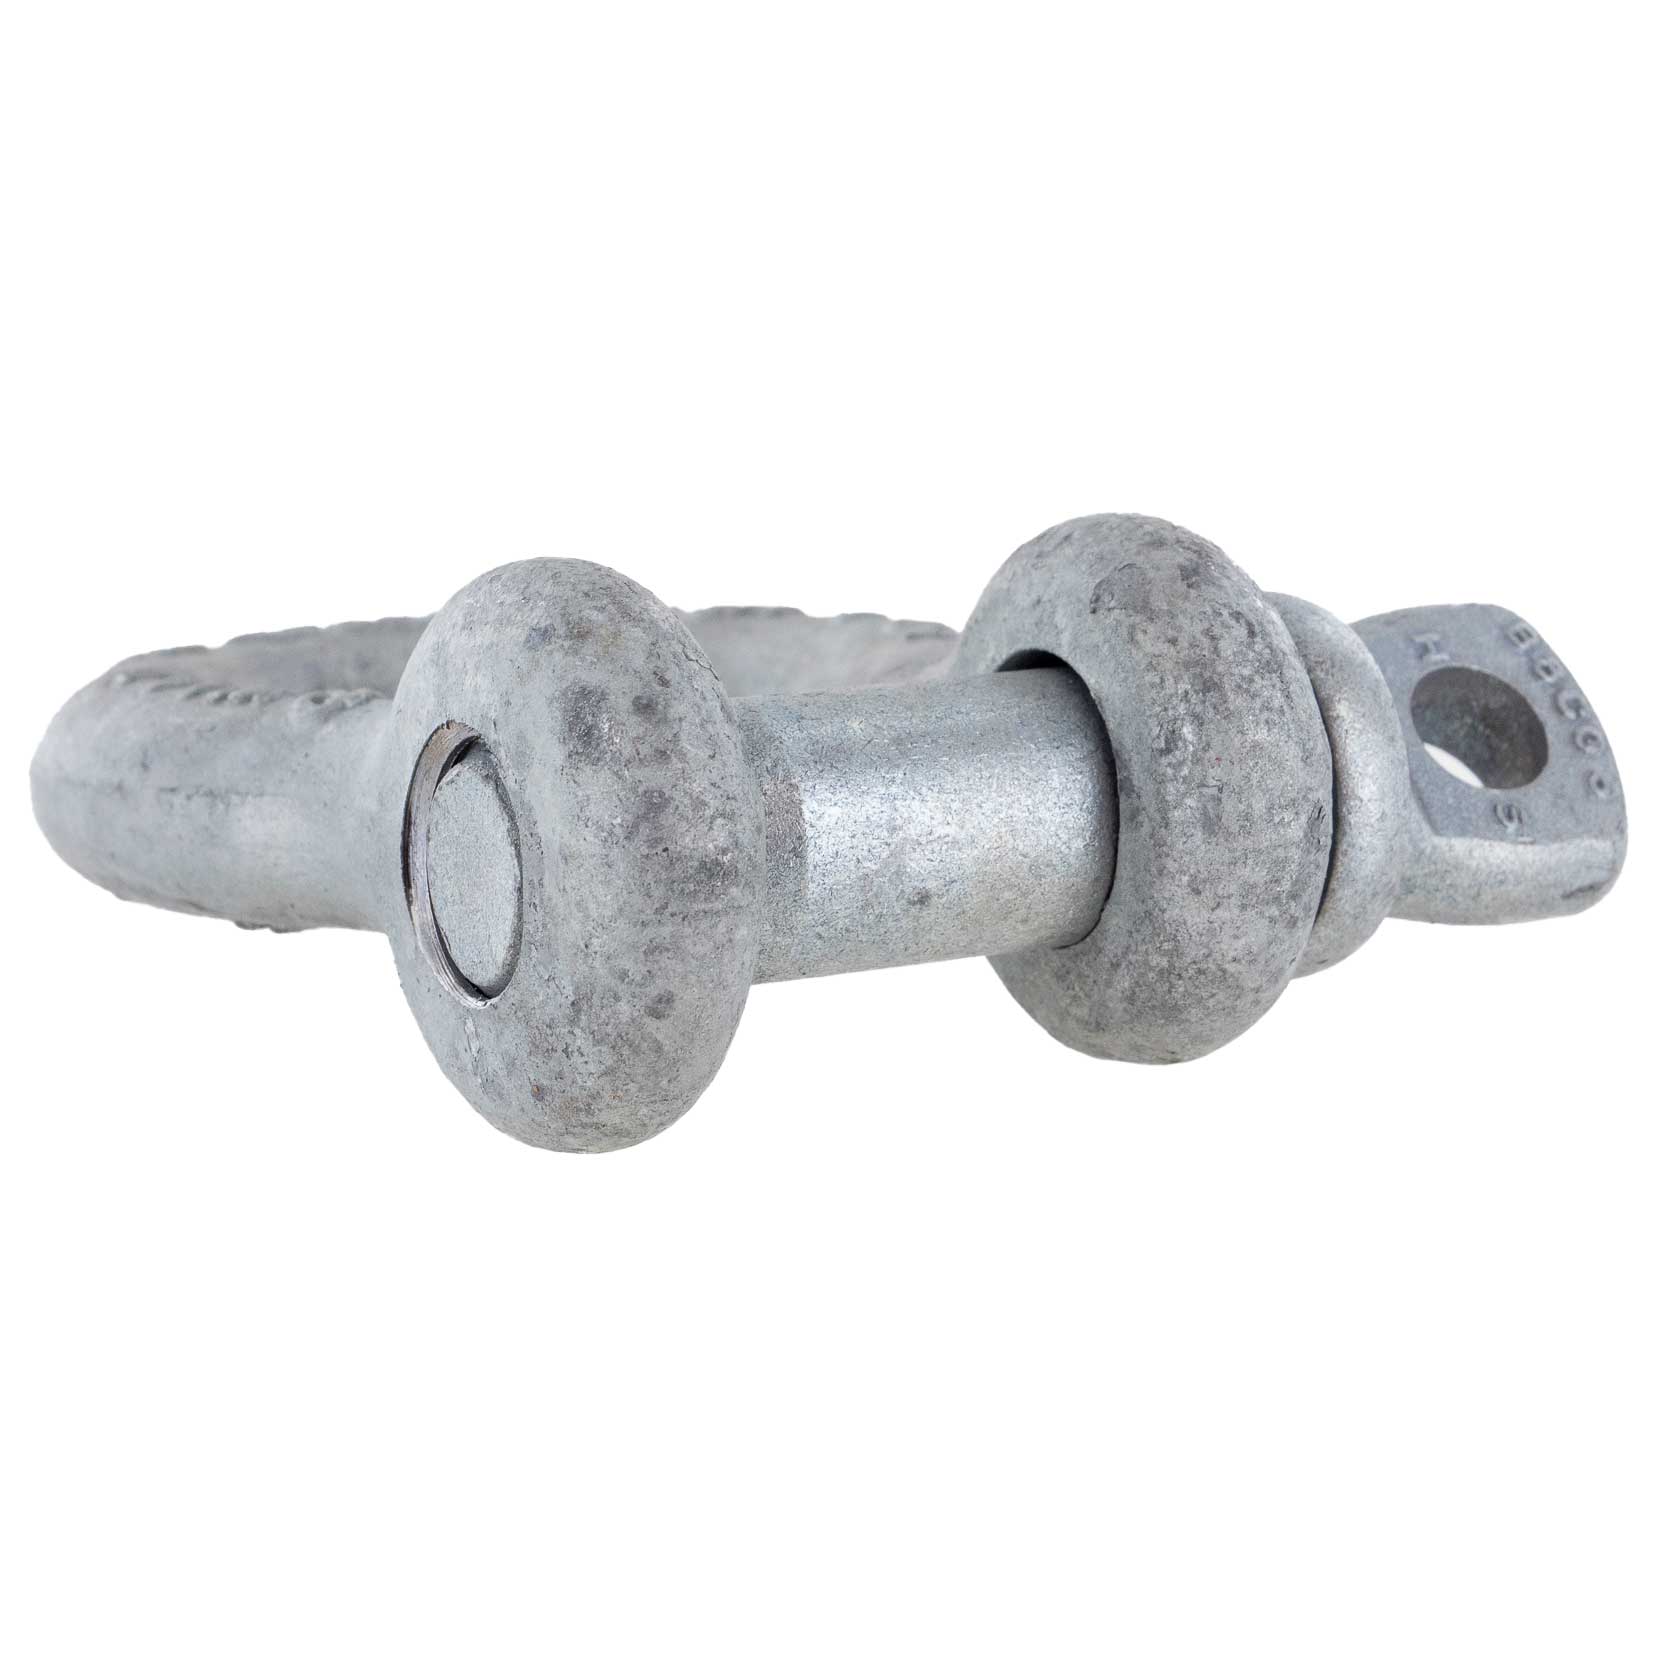 3/8" Crosby® Alloy Screw Pin Anchor Shackle | G-209A - 2 Ton side view